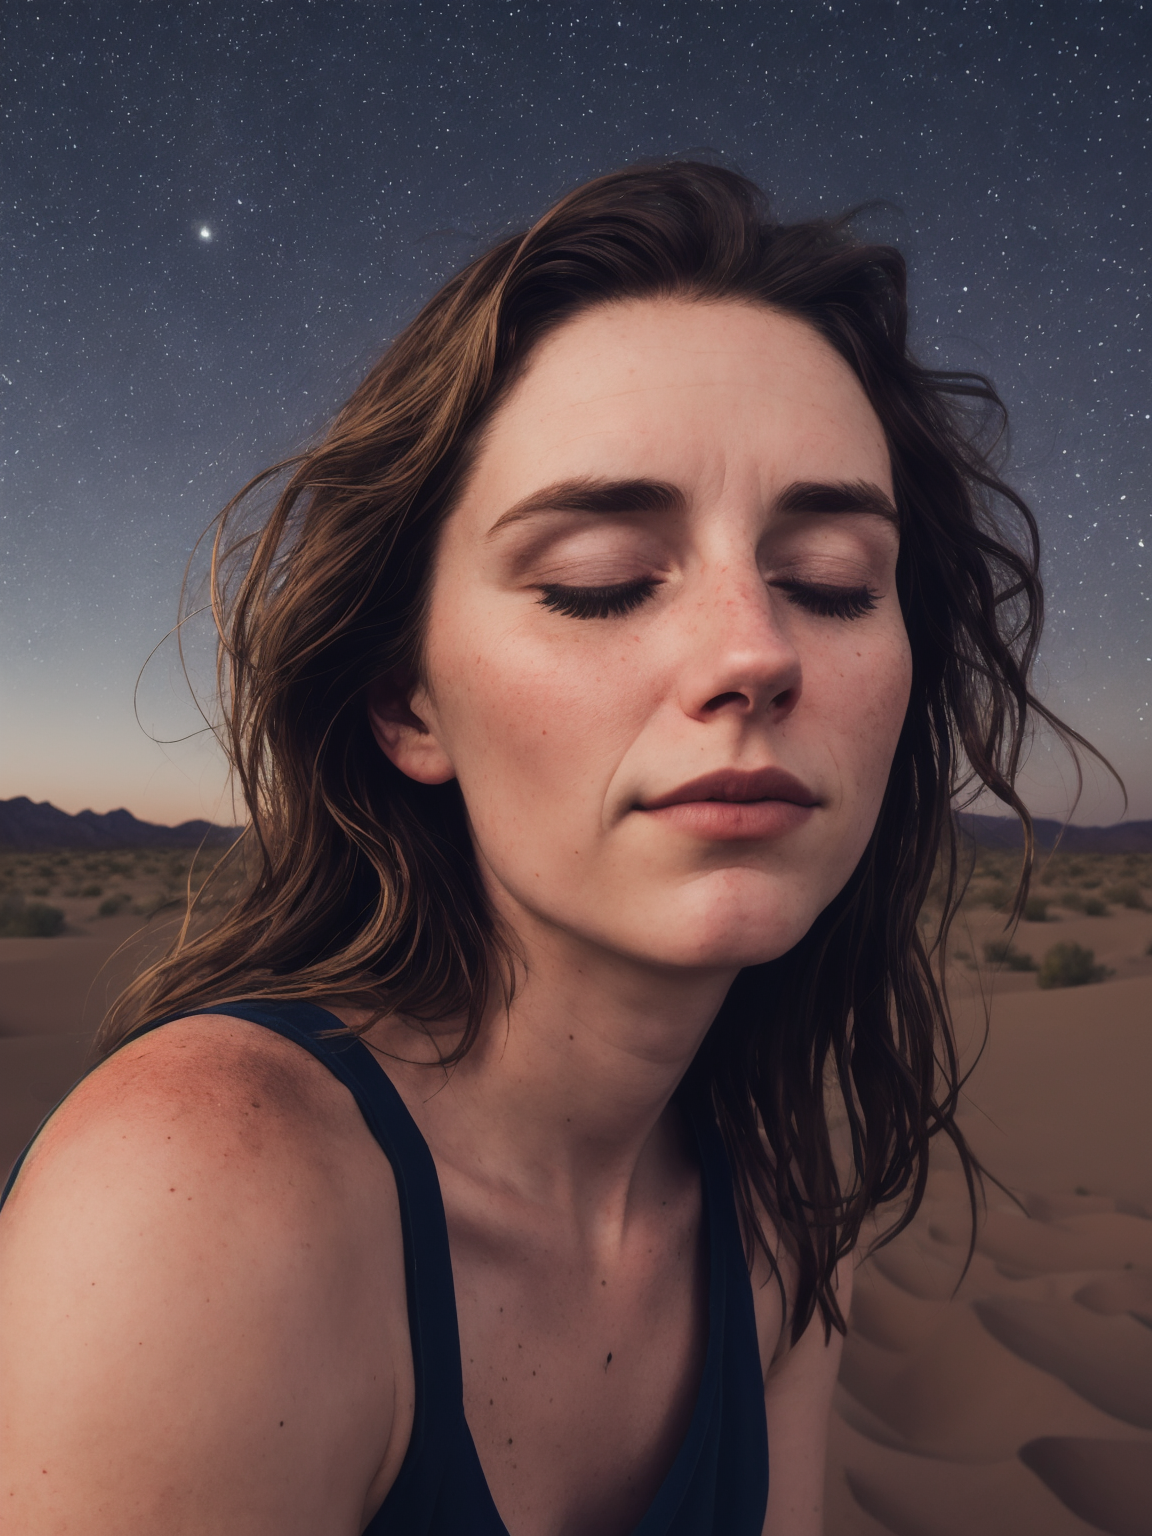 26 year old girl, desert, moon light, starry sky, deep photo, depth of field, Superia 400, shadows, messy hair, perfect fa...